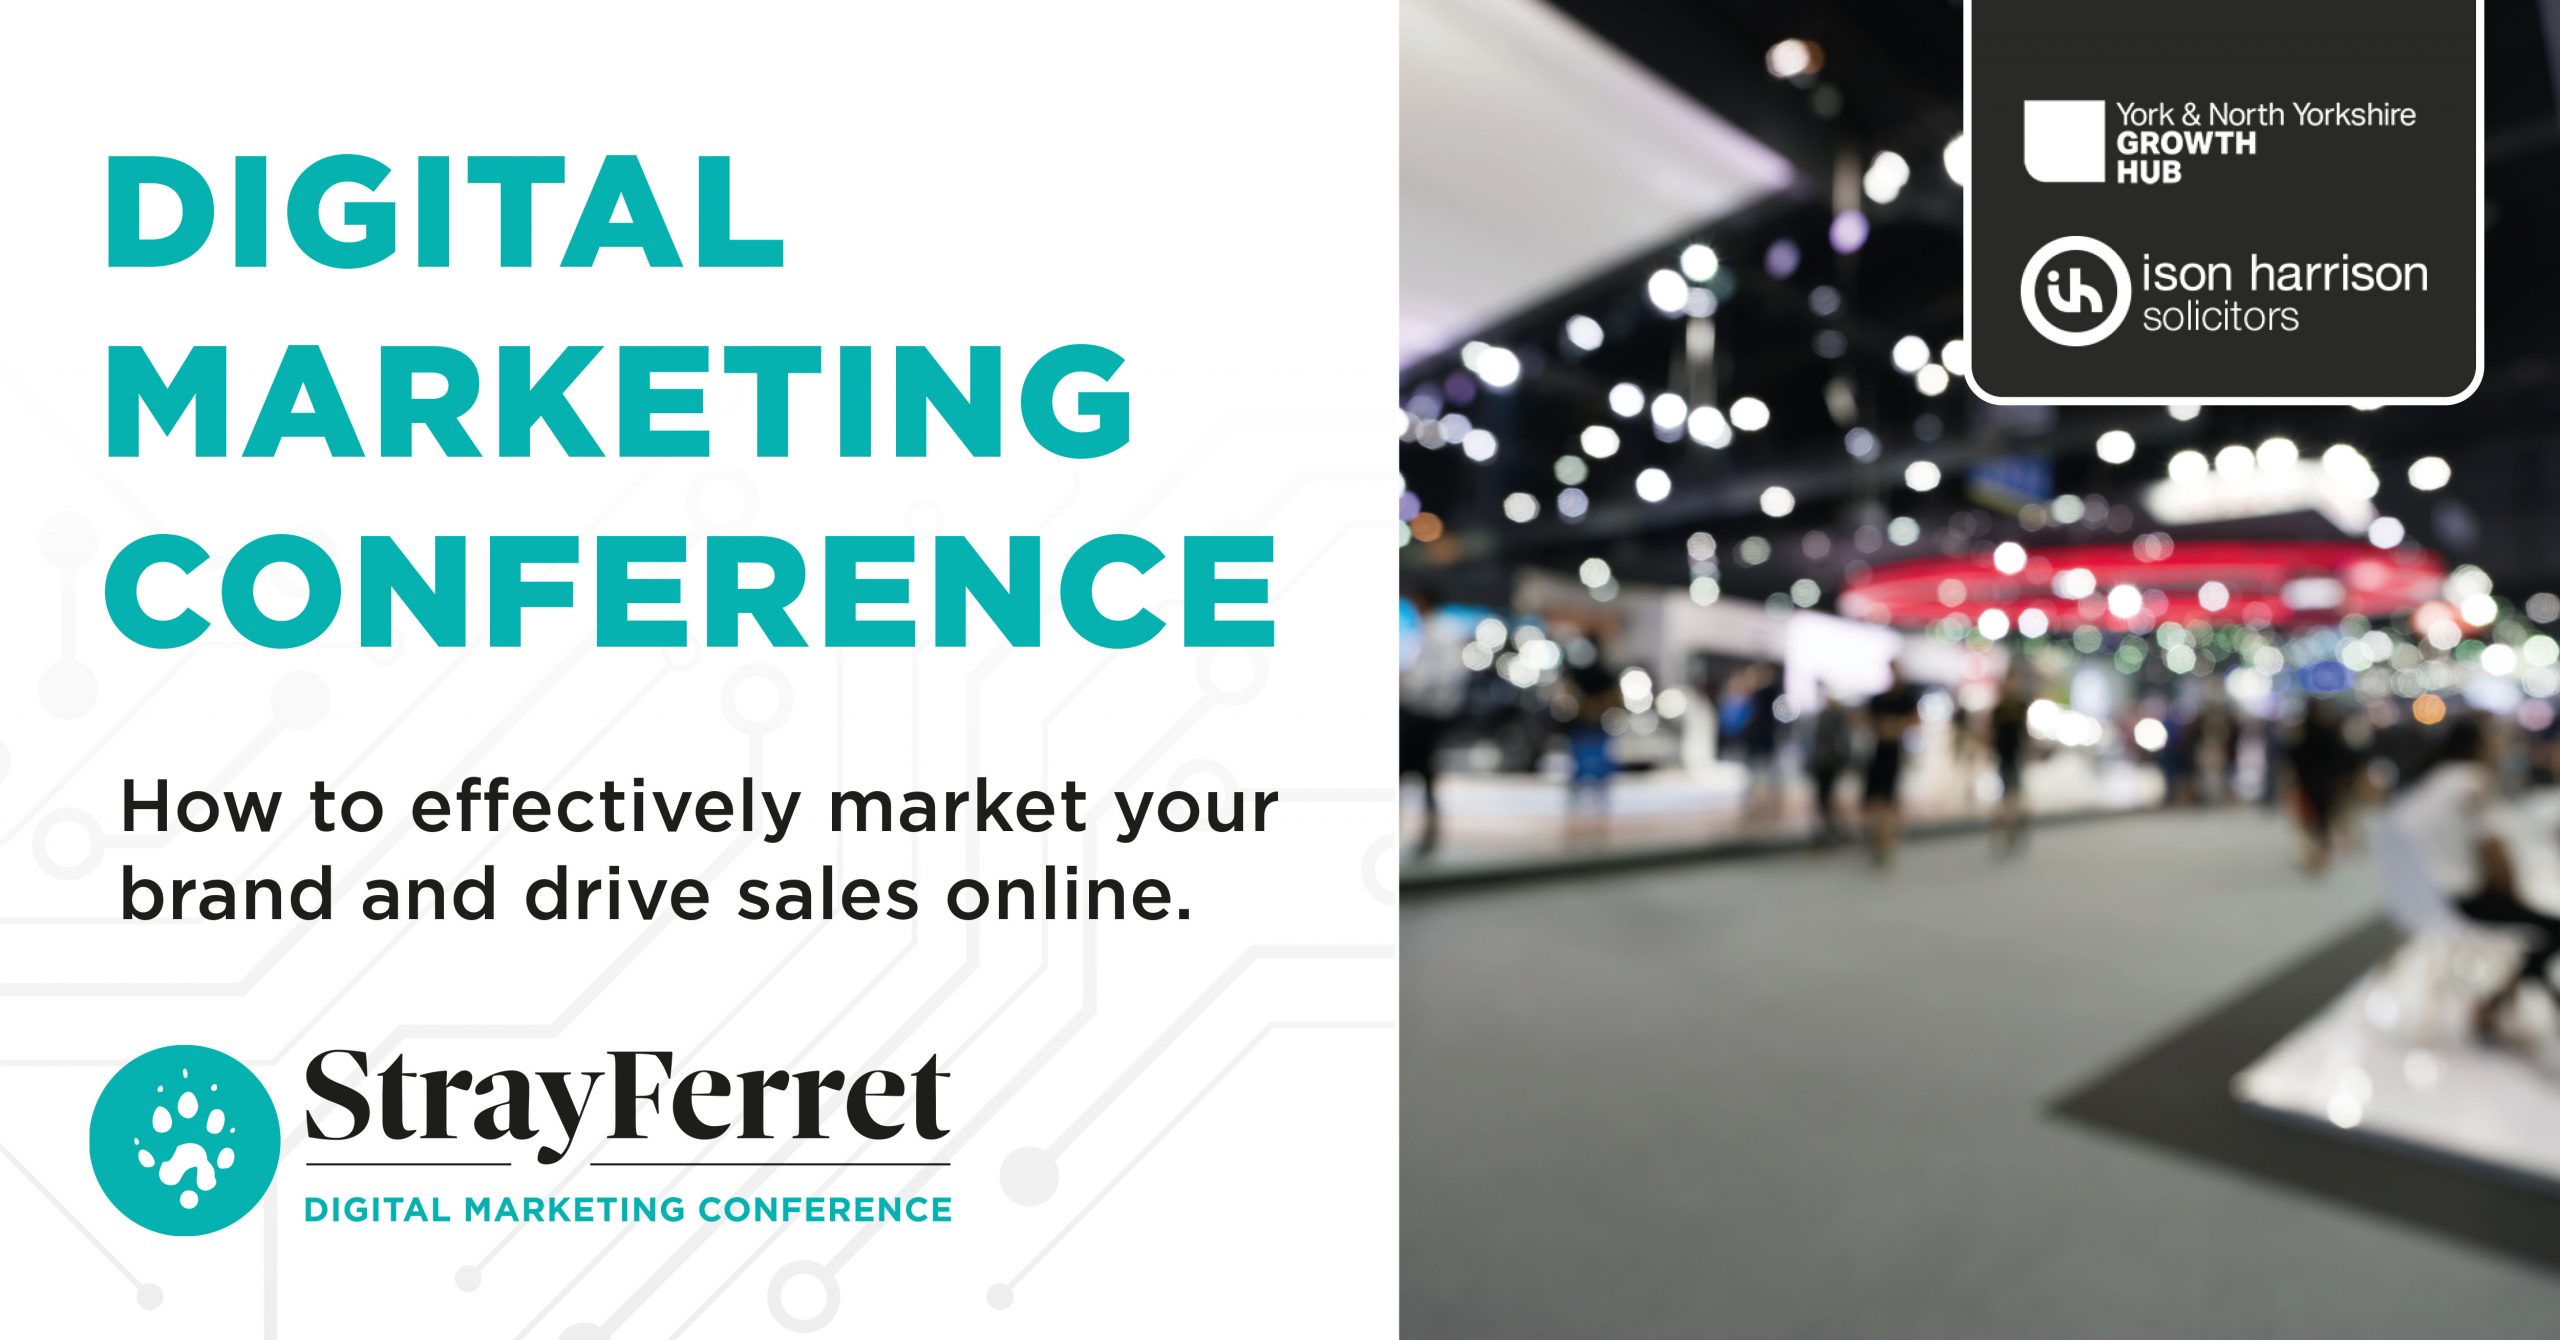 Free Digital Marketing Conference to drive up sales and visibility online